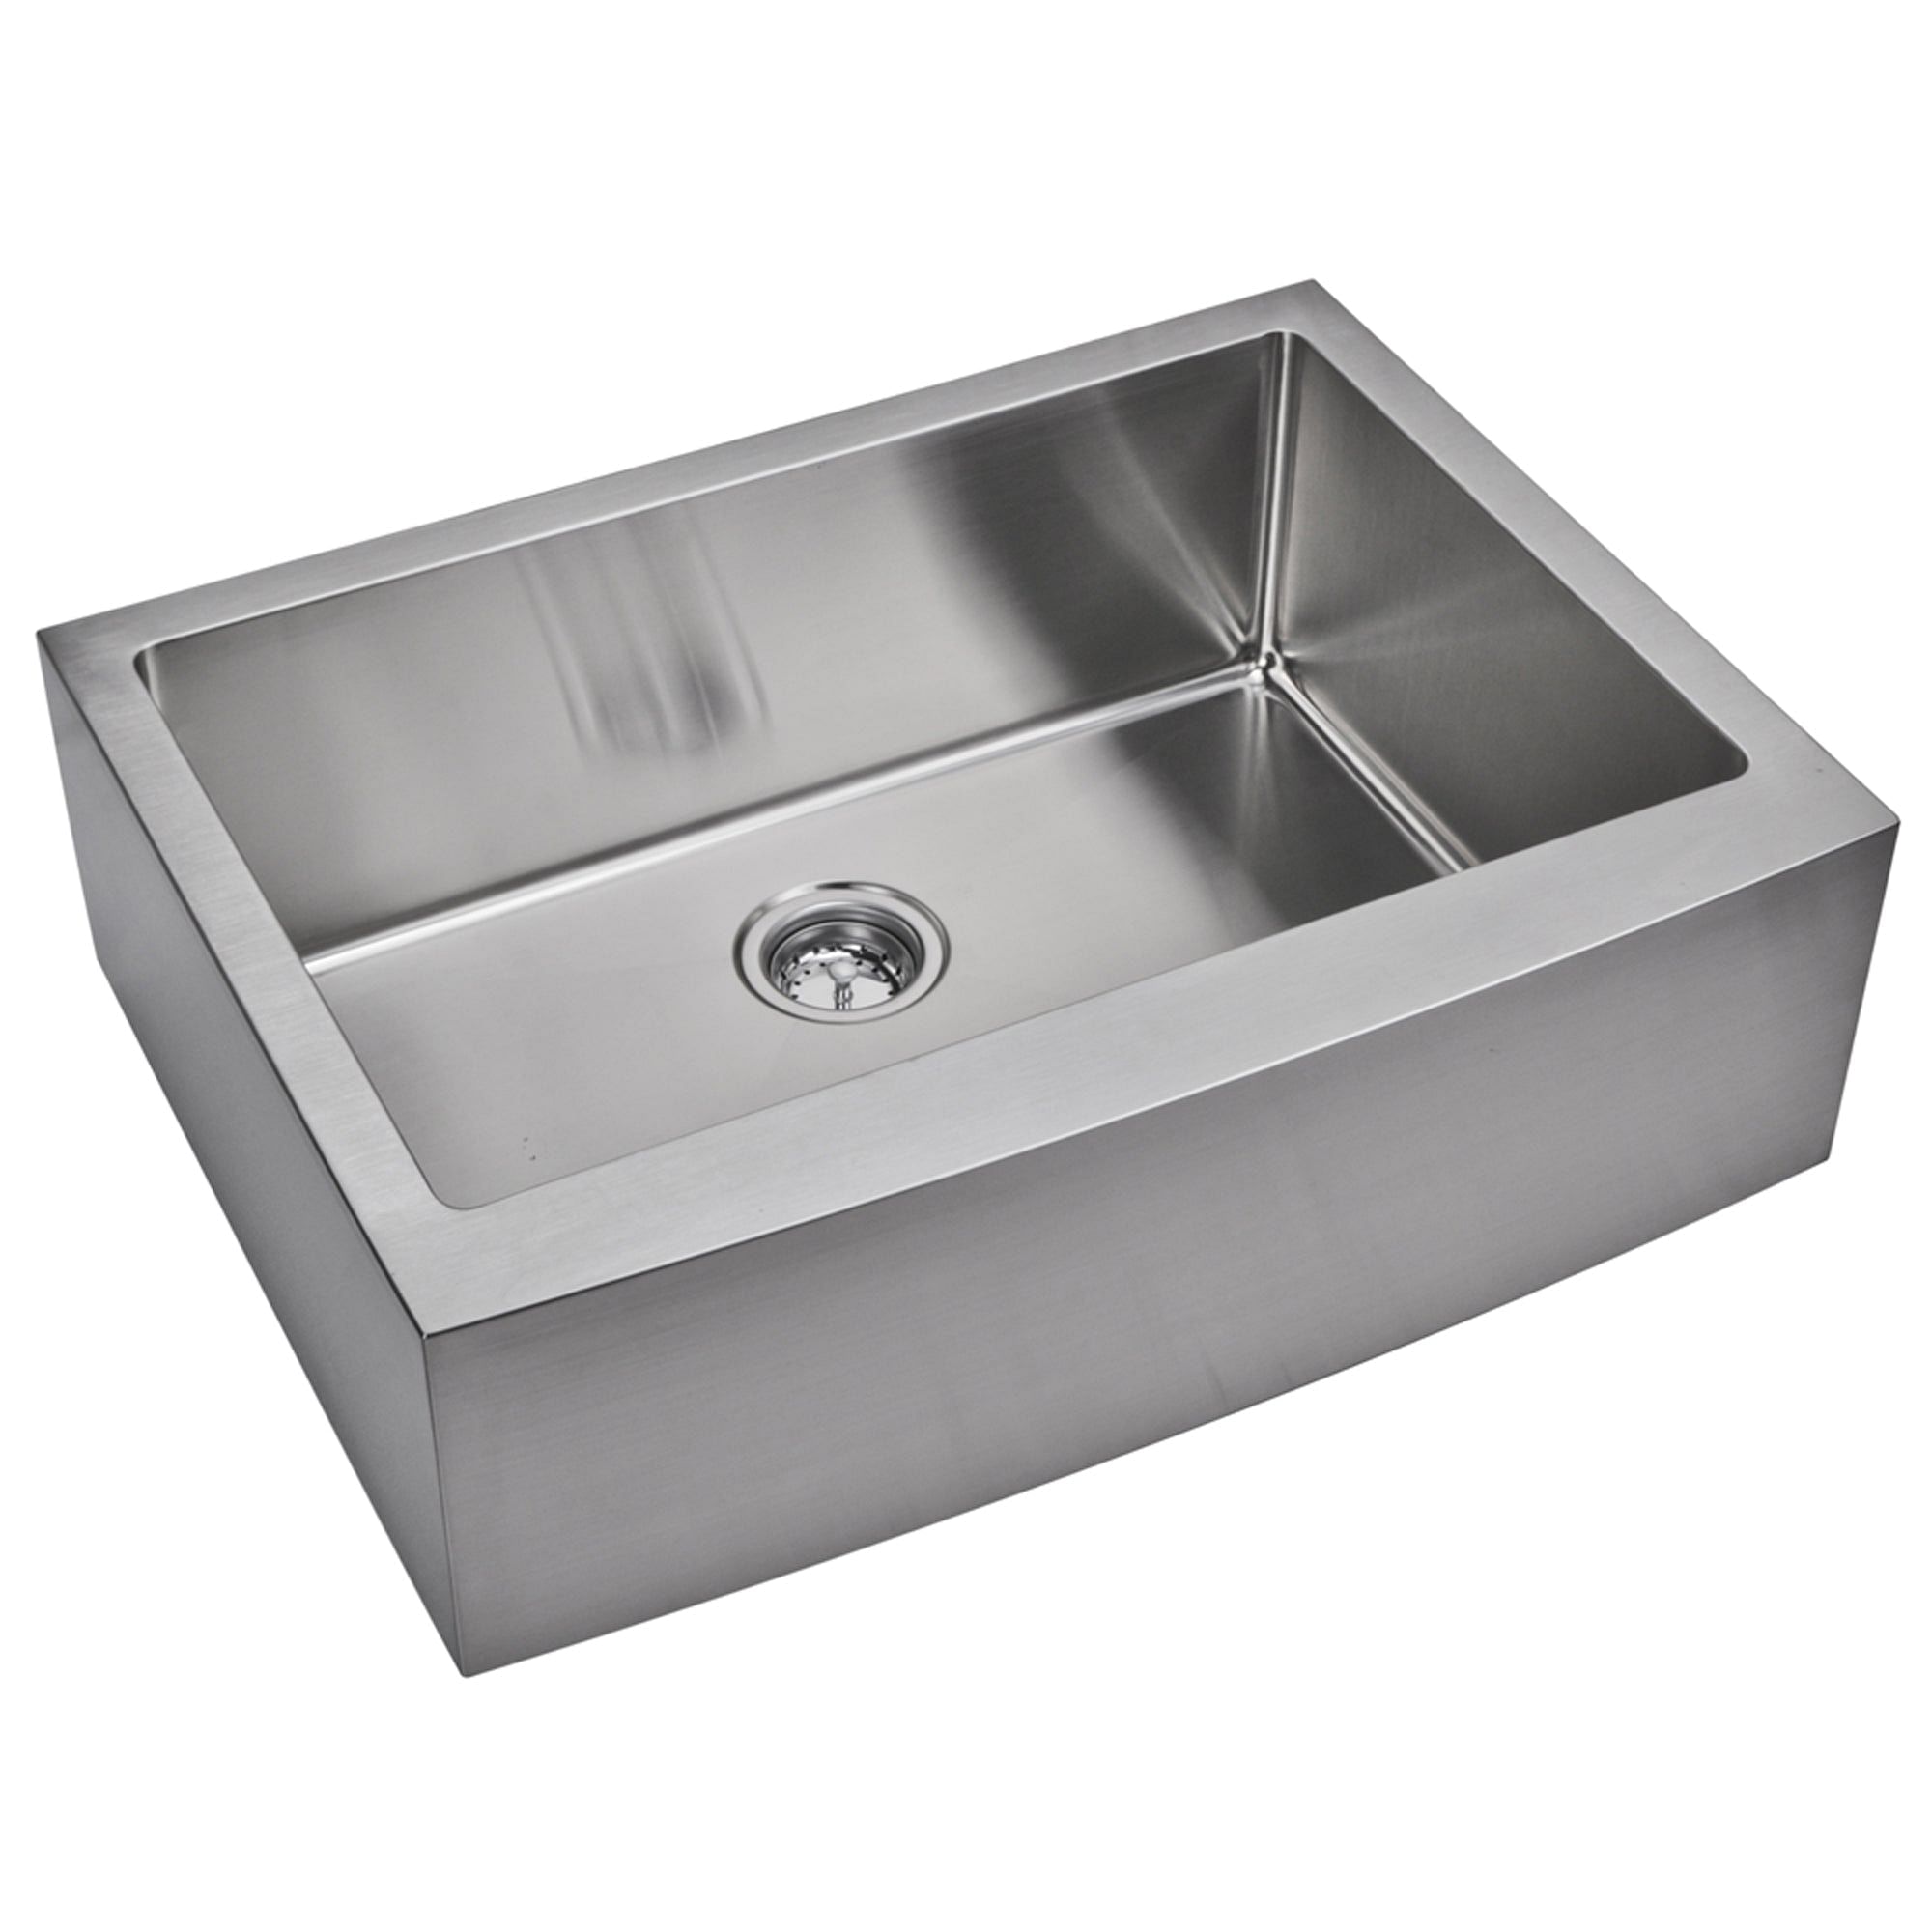 30 Inch X 22 Inch 15mm Corner Radius Single Bowl Stainless Steel Hand Made Apron Front Kitchen Sink With Drain and Strainer